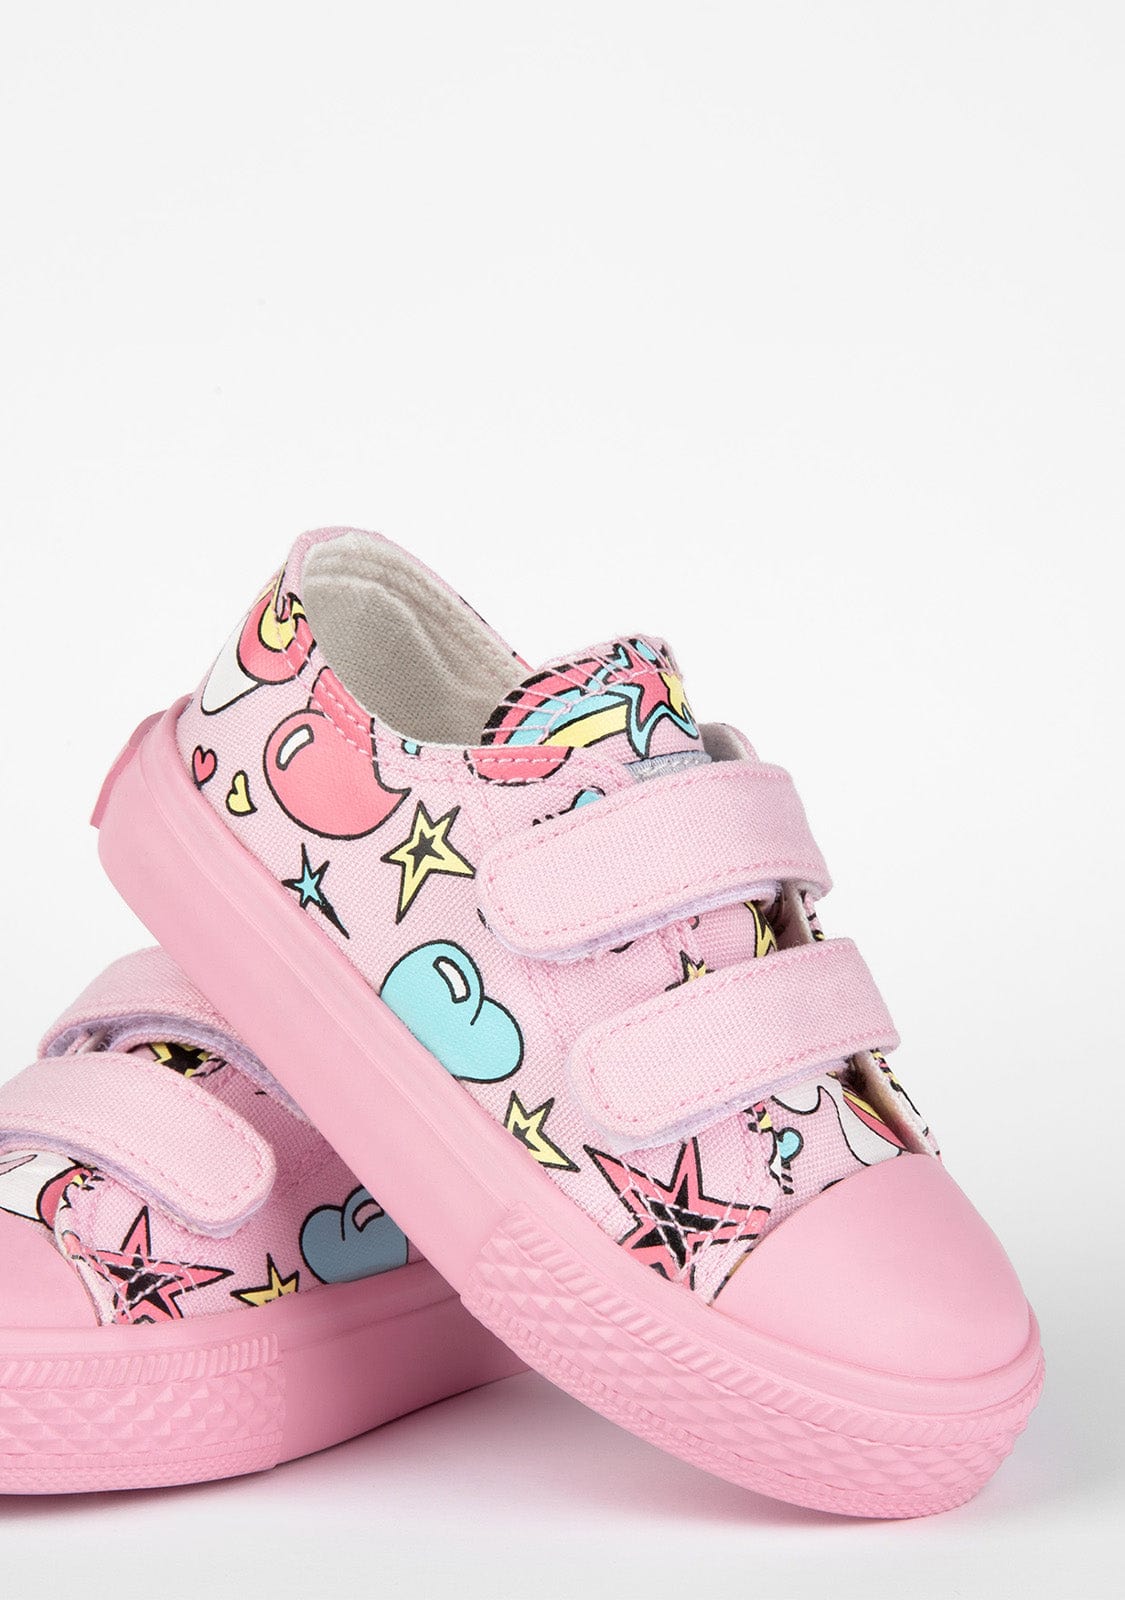 OSITO Shoes Baby's Pink Unicorn Sneakers